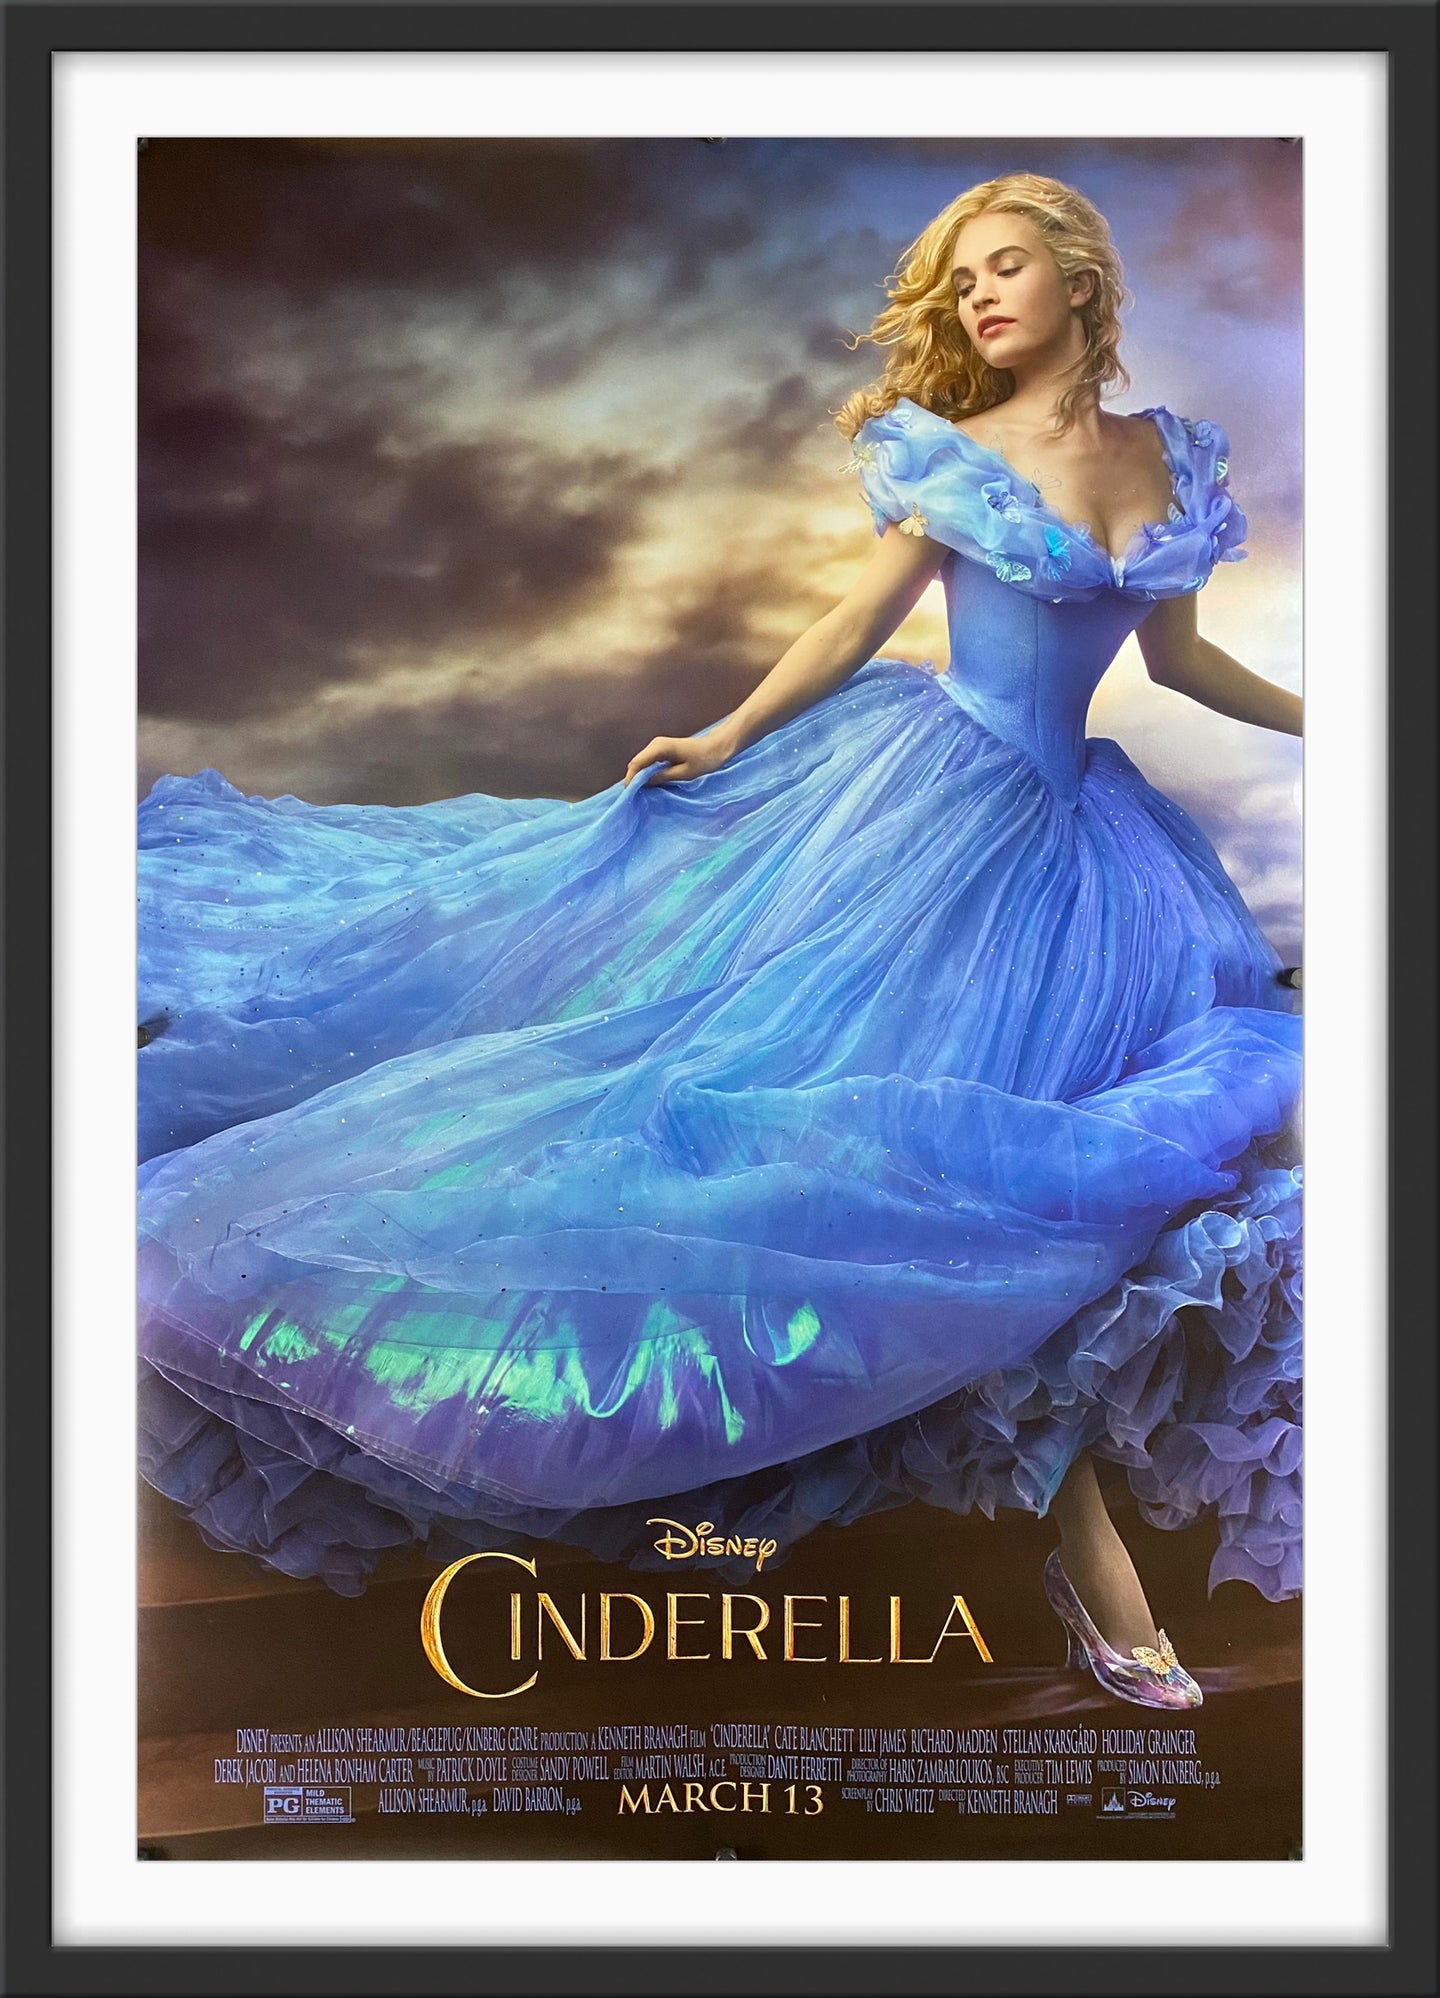  Movie Poster Cinderella 2 Sided Original INTL Final 27x40 Lily  James: Posters & Prints